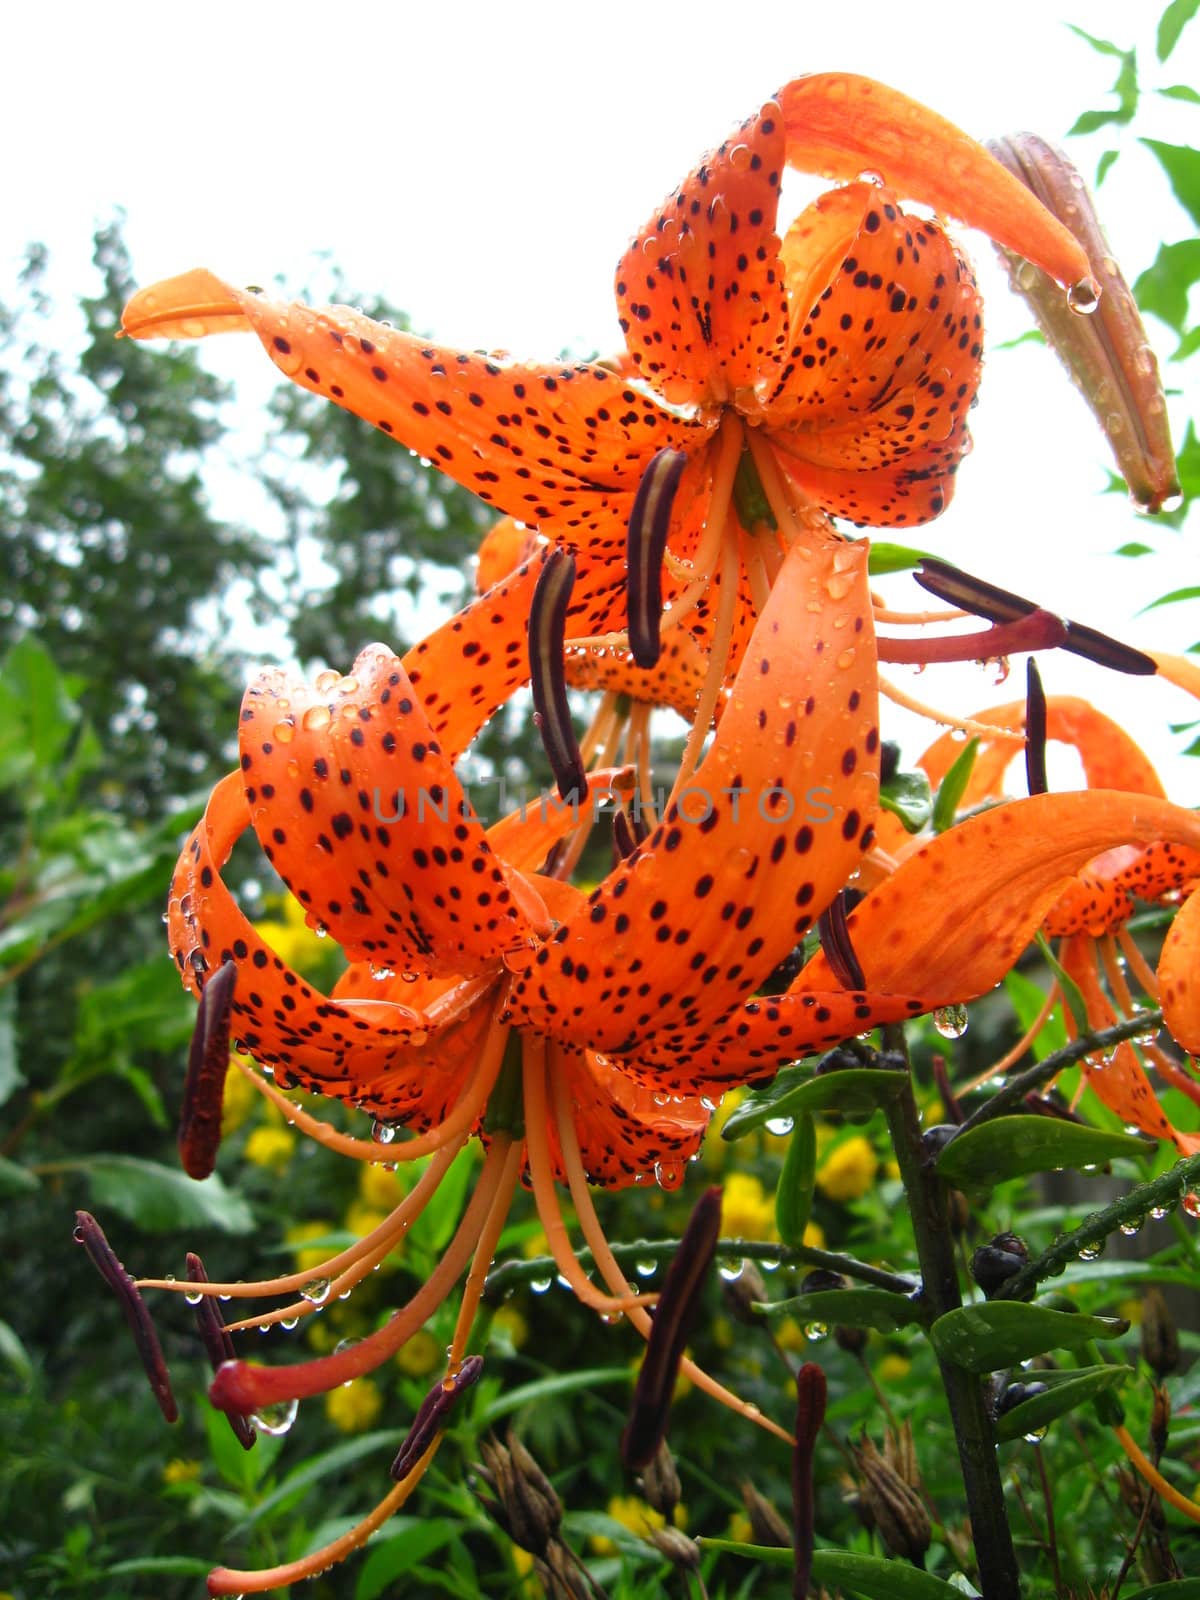 Drops of water on the redheaded lilies after a rain